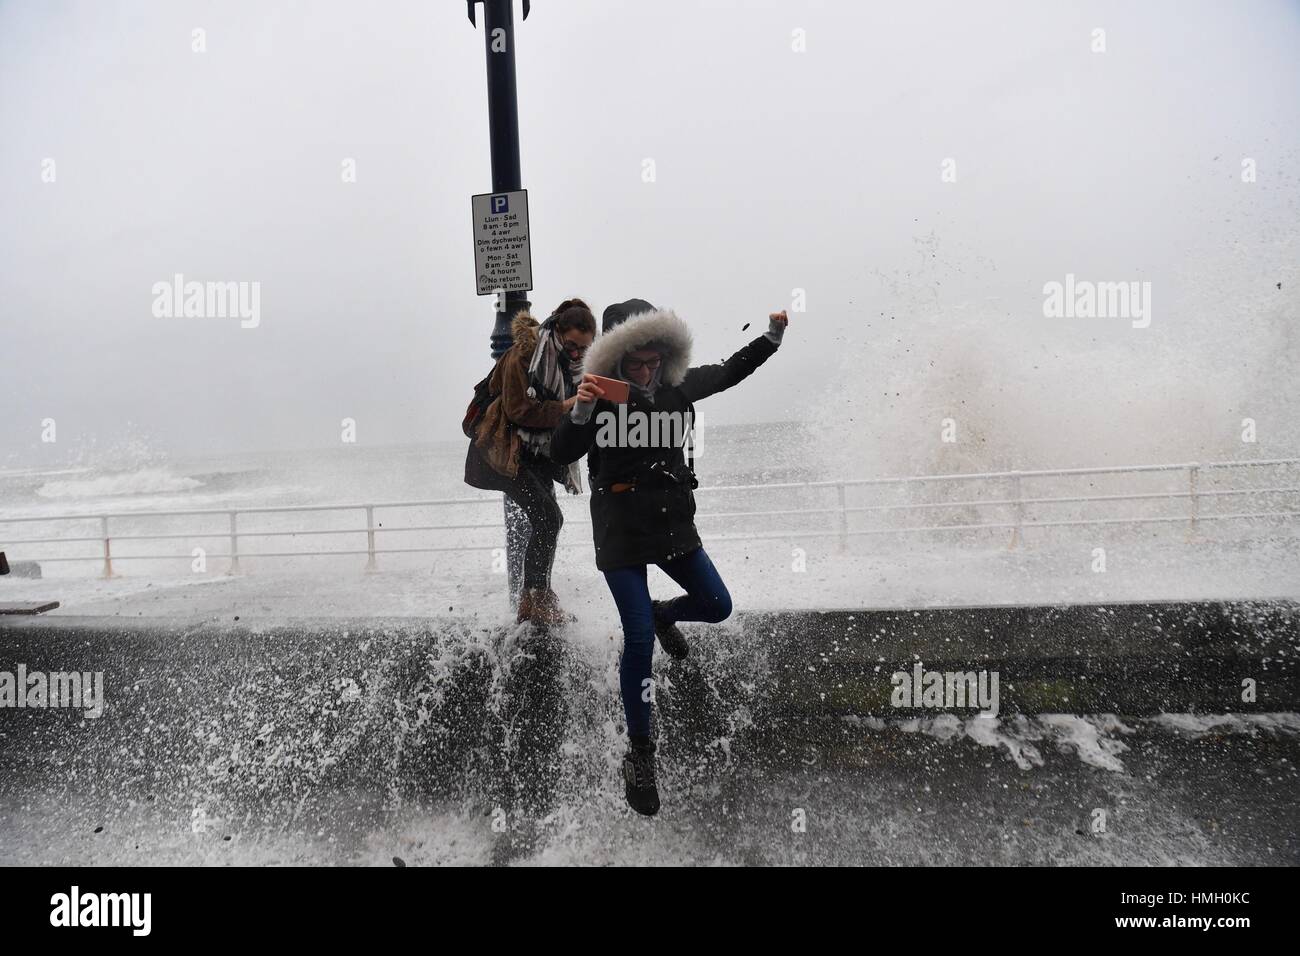 Aberystwyth, Ceredigion, Wales, UK. 3rd Feb, 2017. UK Weather. Two young women get soaked by the waves as high tides and a strong Atlantic swell this morning bring huge waves crashing into the promenade and sea defences in Aberystwyth on the west wales coast. Potentially damaging gales, with gusts in excess of 60mph are forecast to strike parts of southern UK today photo Credit: keith morris/Alamy Live News Stock Photo